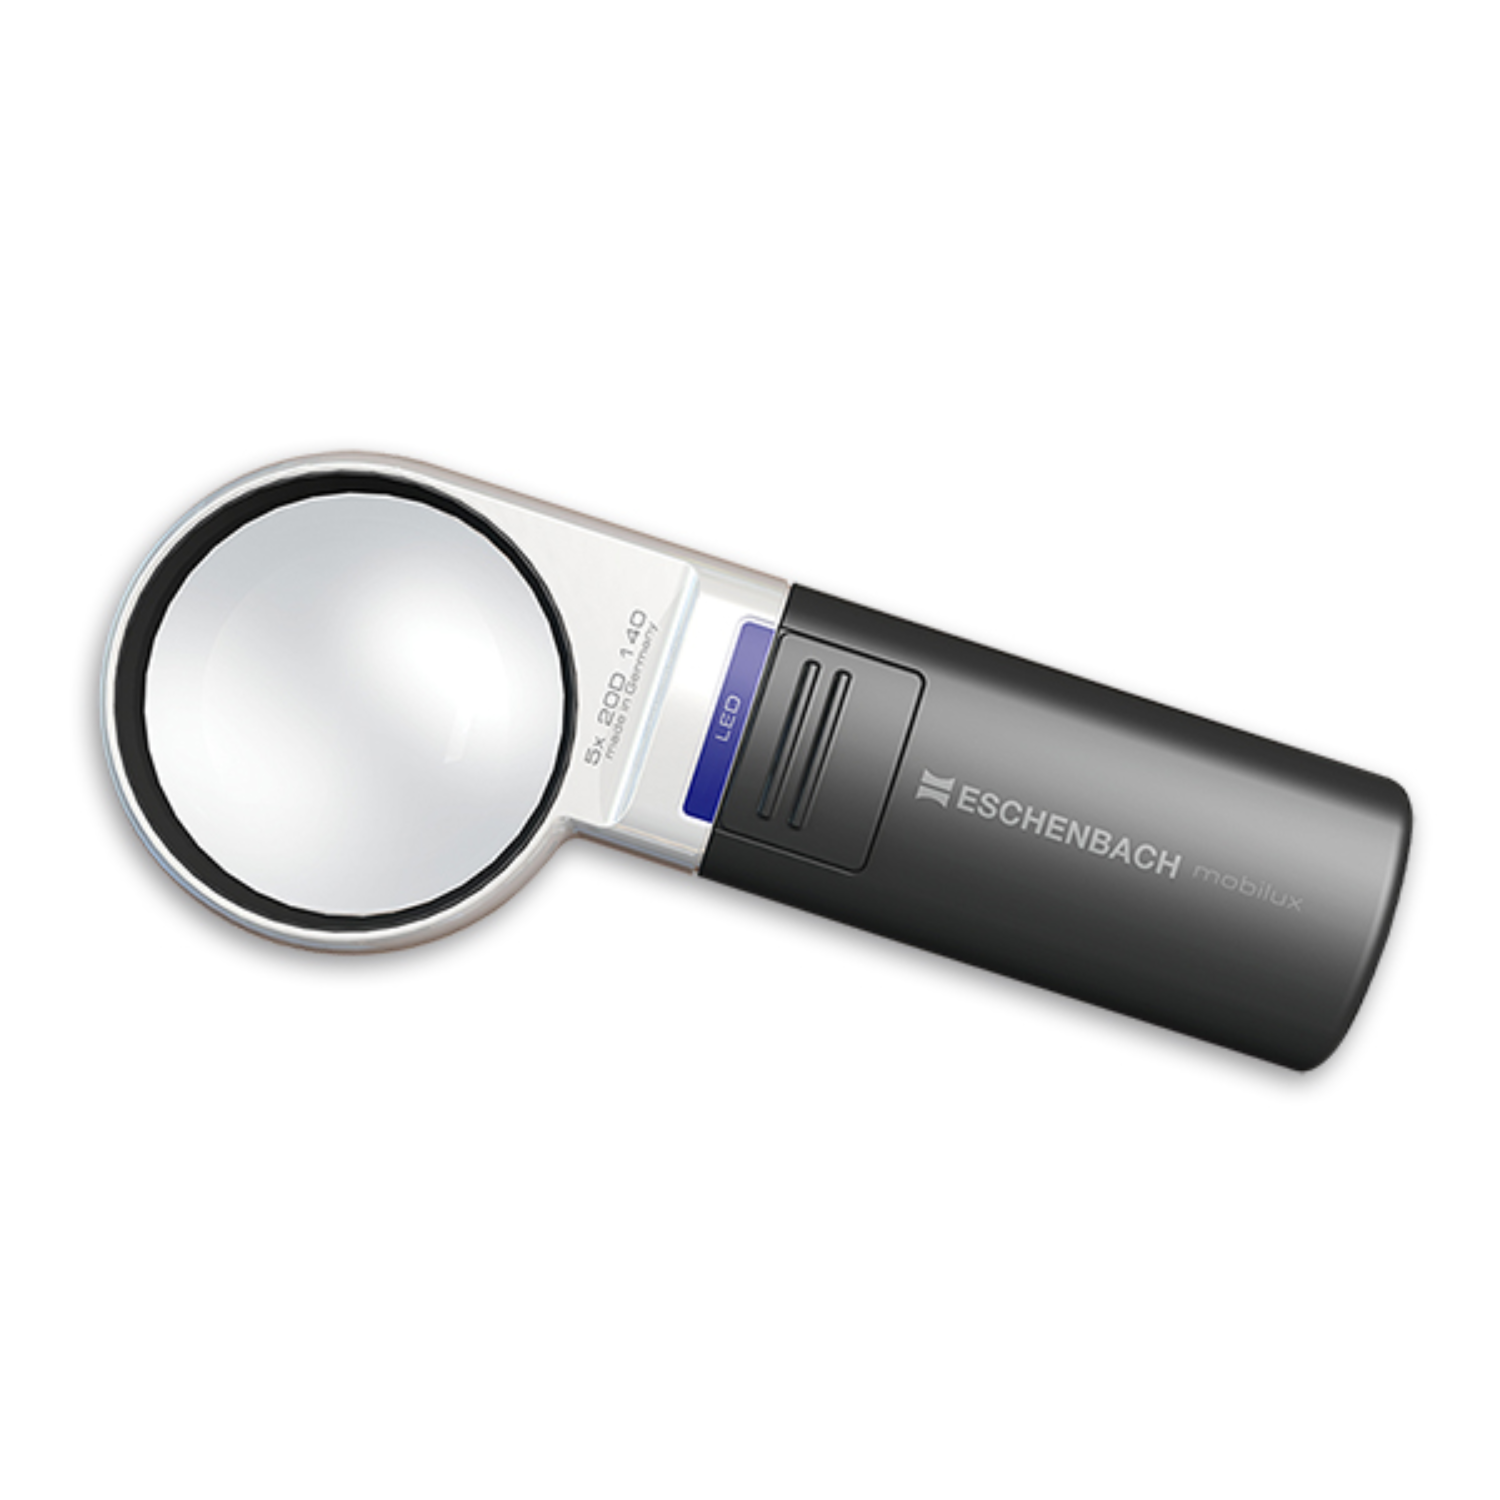 Mobilux LED Hand Held Magnifier - 4x